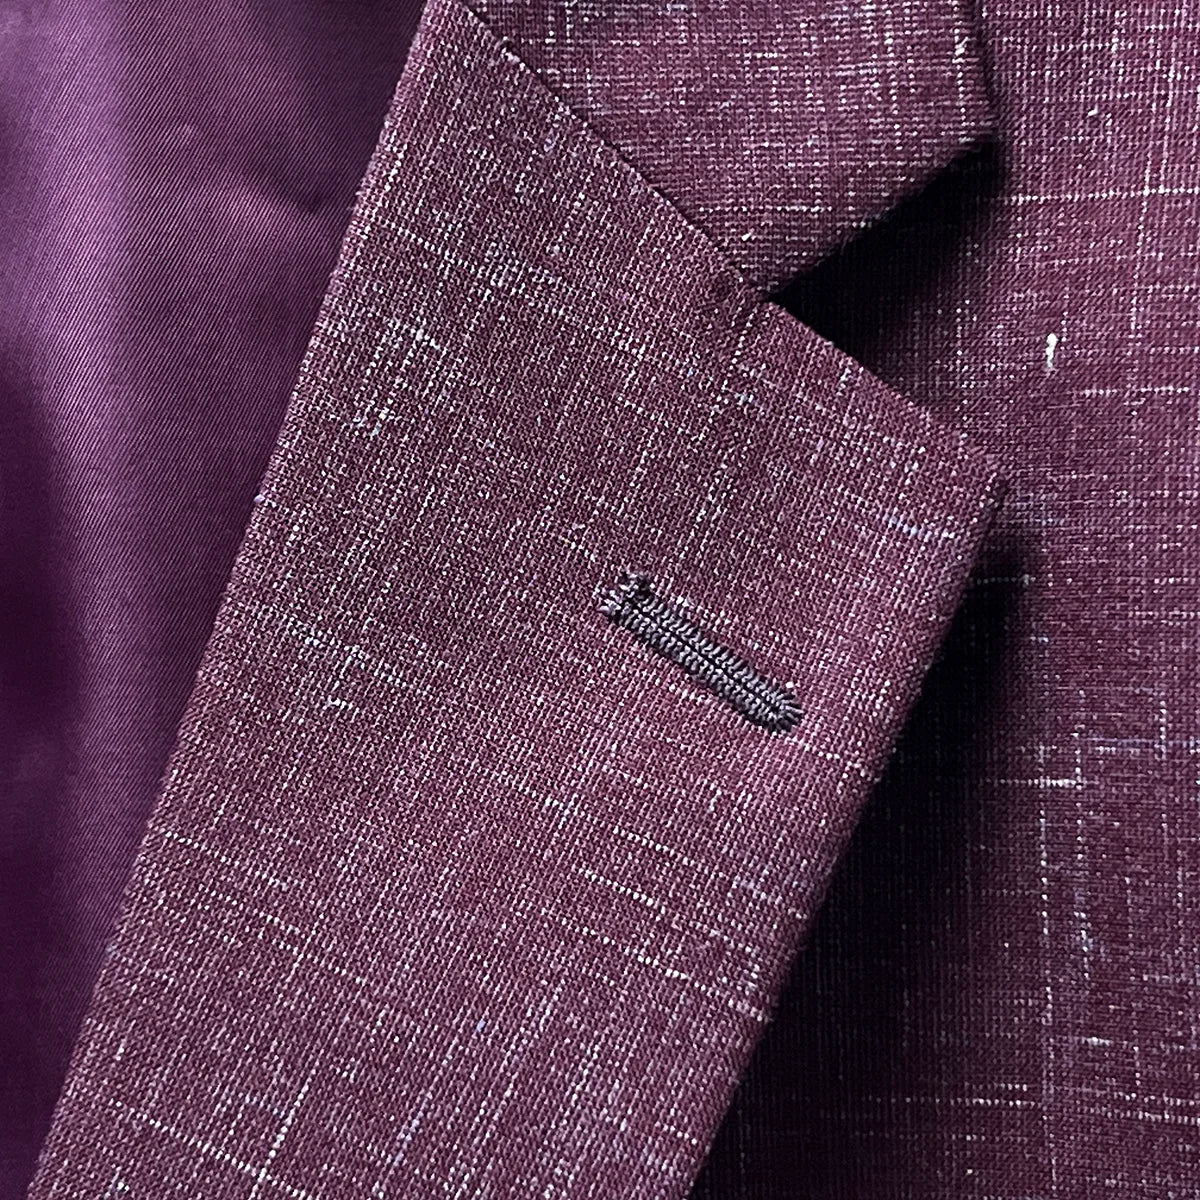 Notch lapel detail on a cranberry men's suit by Westwood Hart, reflecting classic tailoring and style.